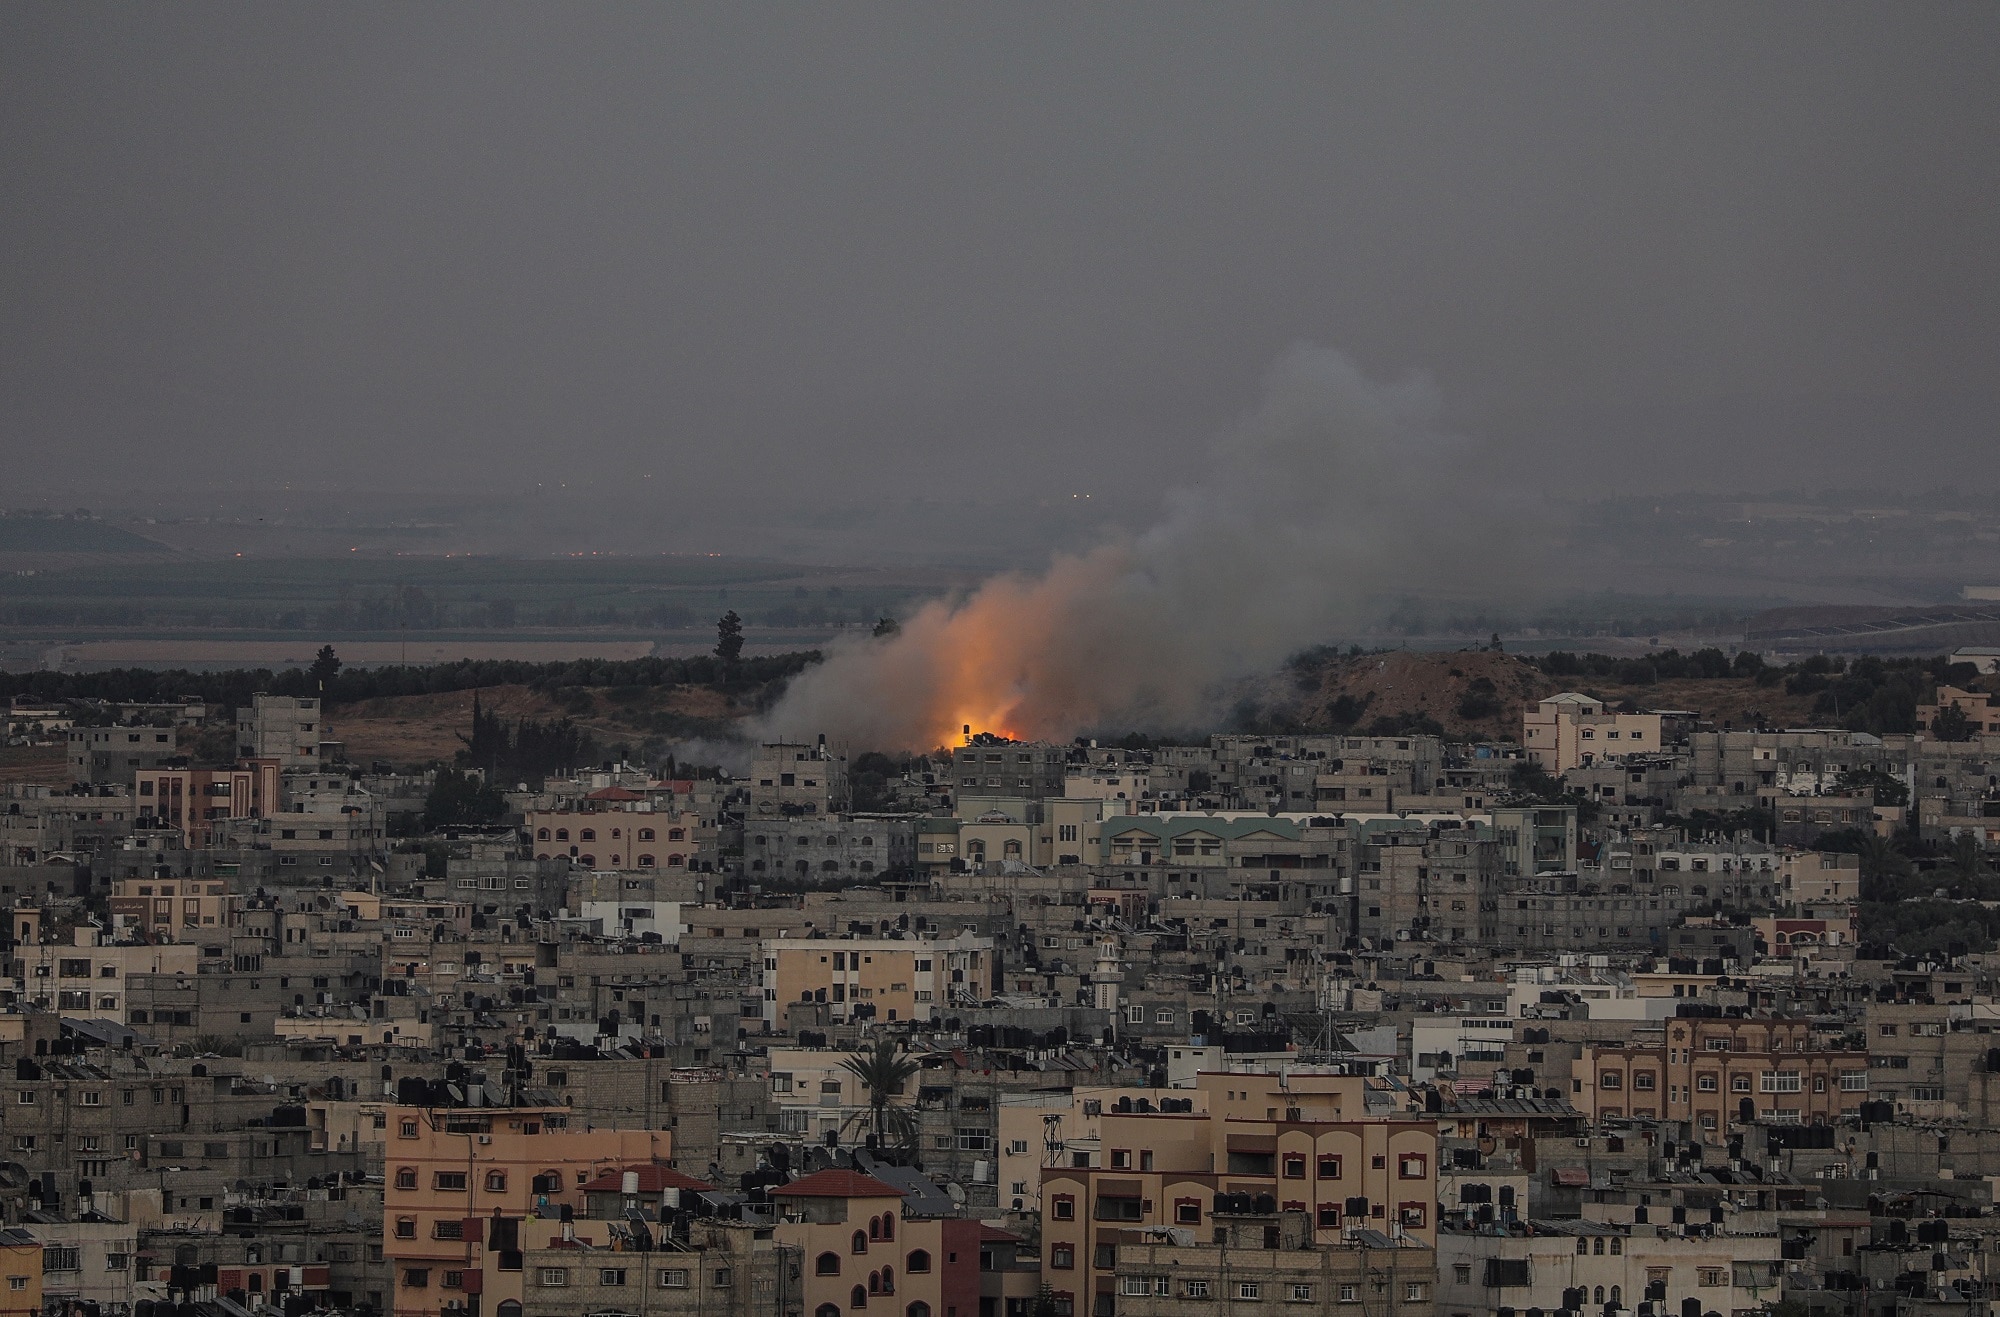 Palestinian health officials say more than 200 people have been wounded in the Israeli airstrikes on Gaza.